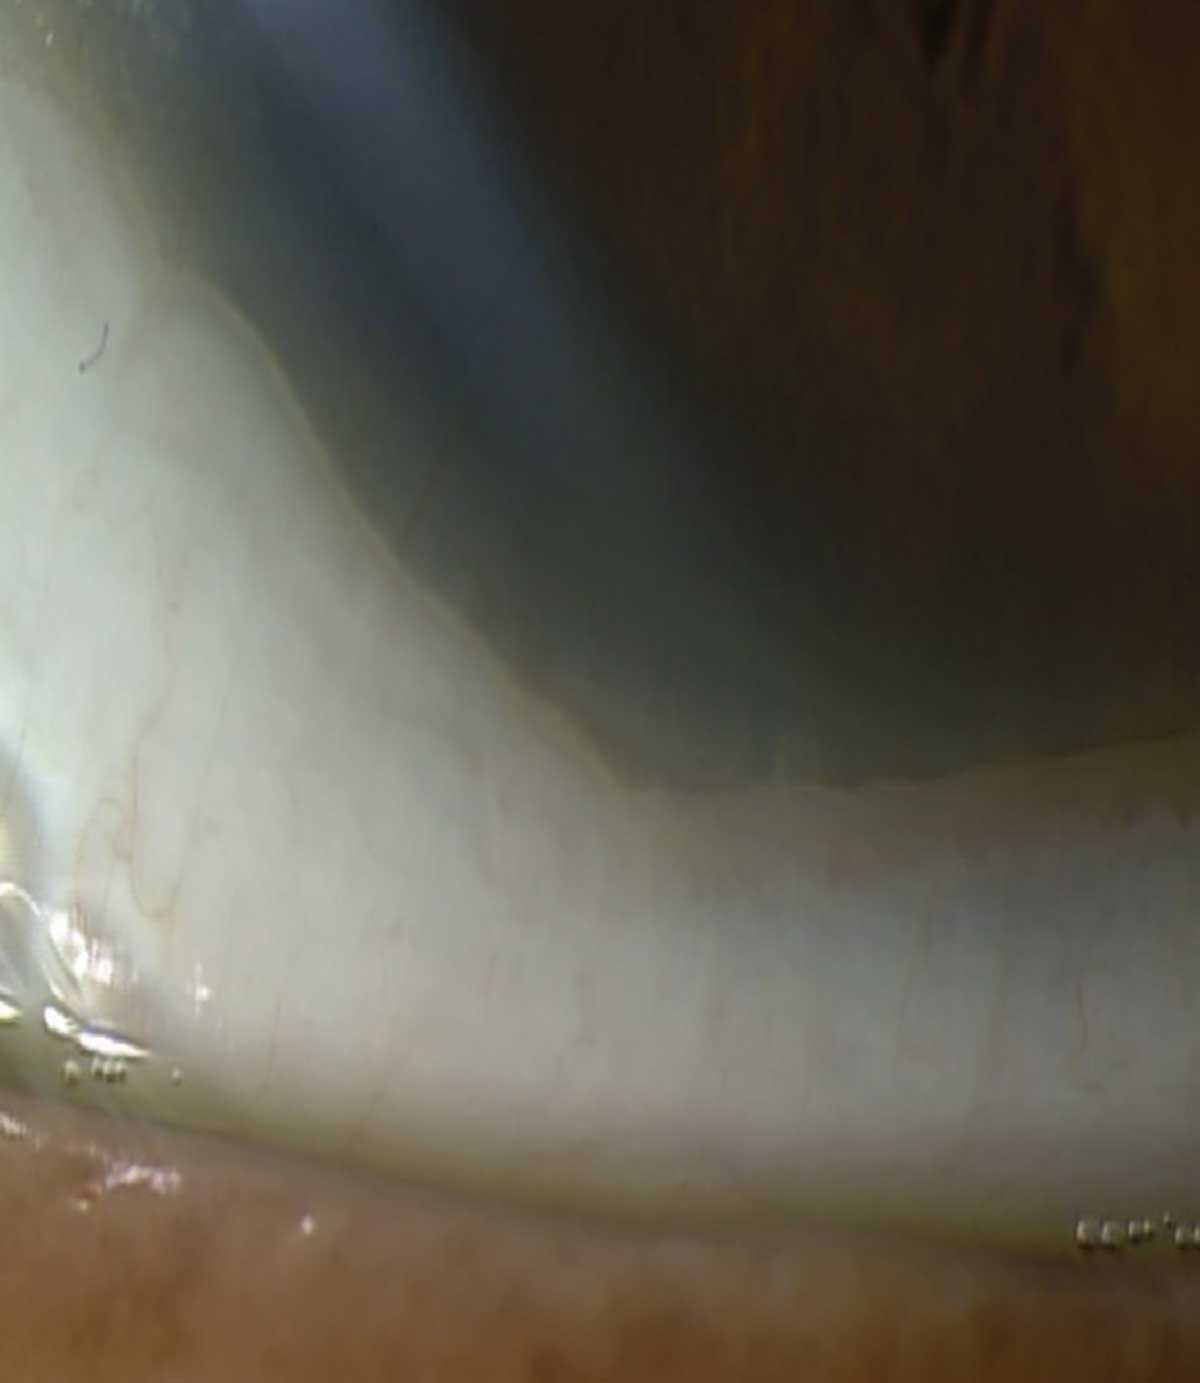 Fig. 4. Patient with scleral prolapse, which was resolved with the assistance of a laboratory consultant. This image was uploaded to the lab’s web consultation tool, along with other fitting data, and they replied via email with suggested changes to the fit, which included reducing the lens diameter.